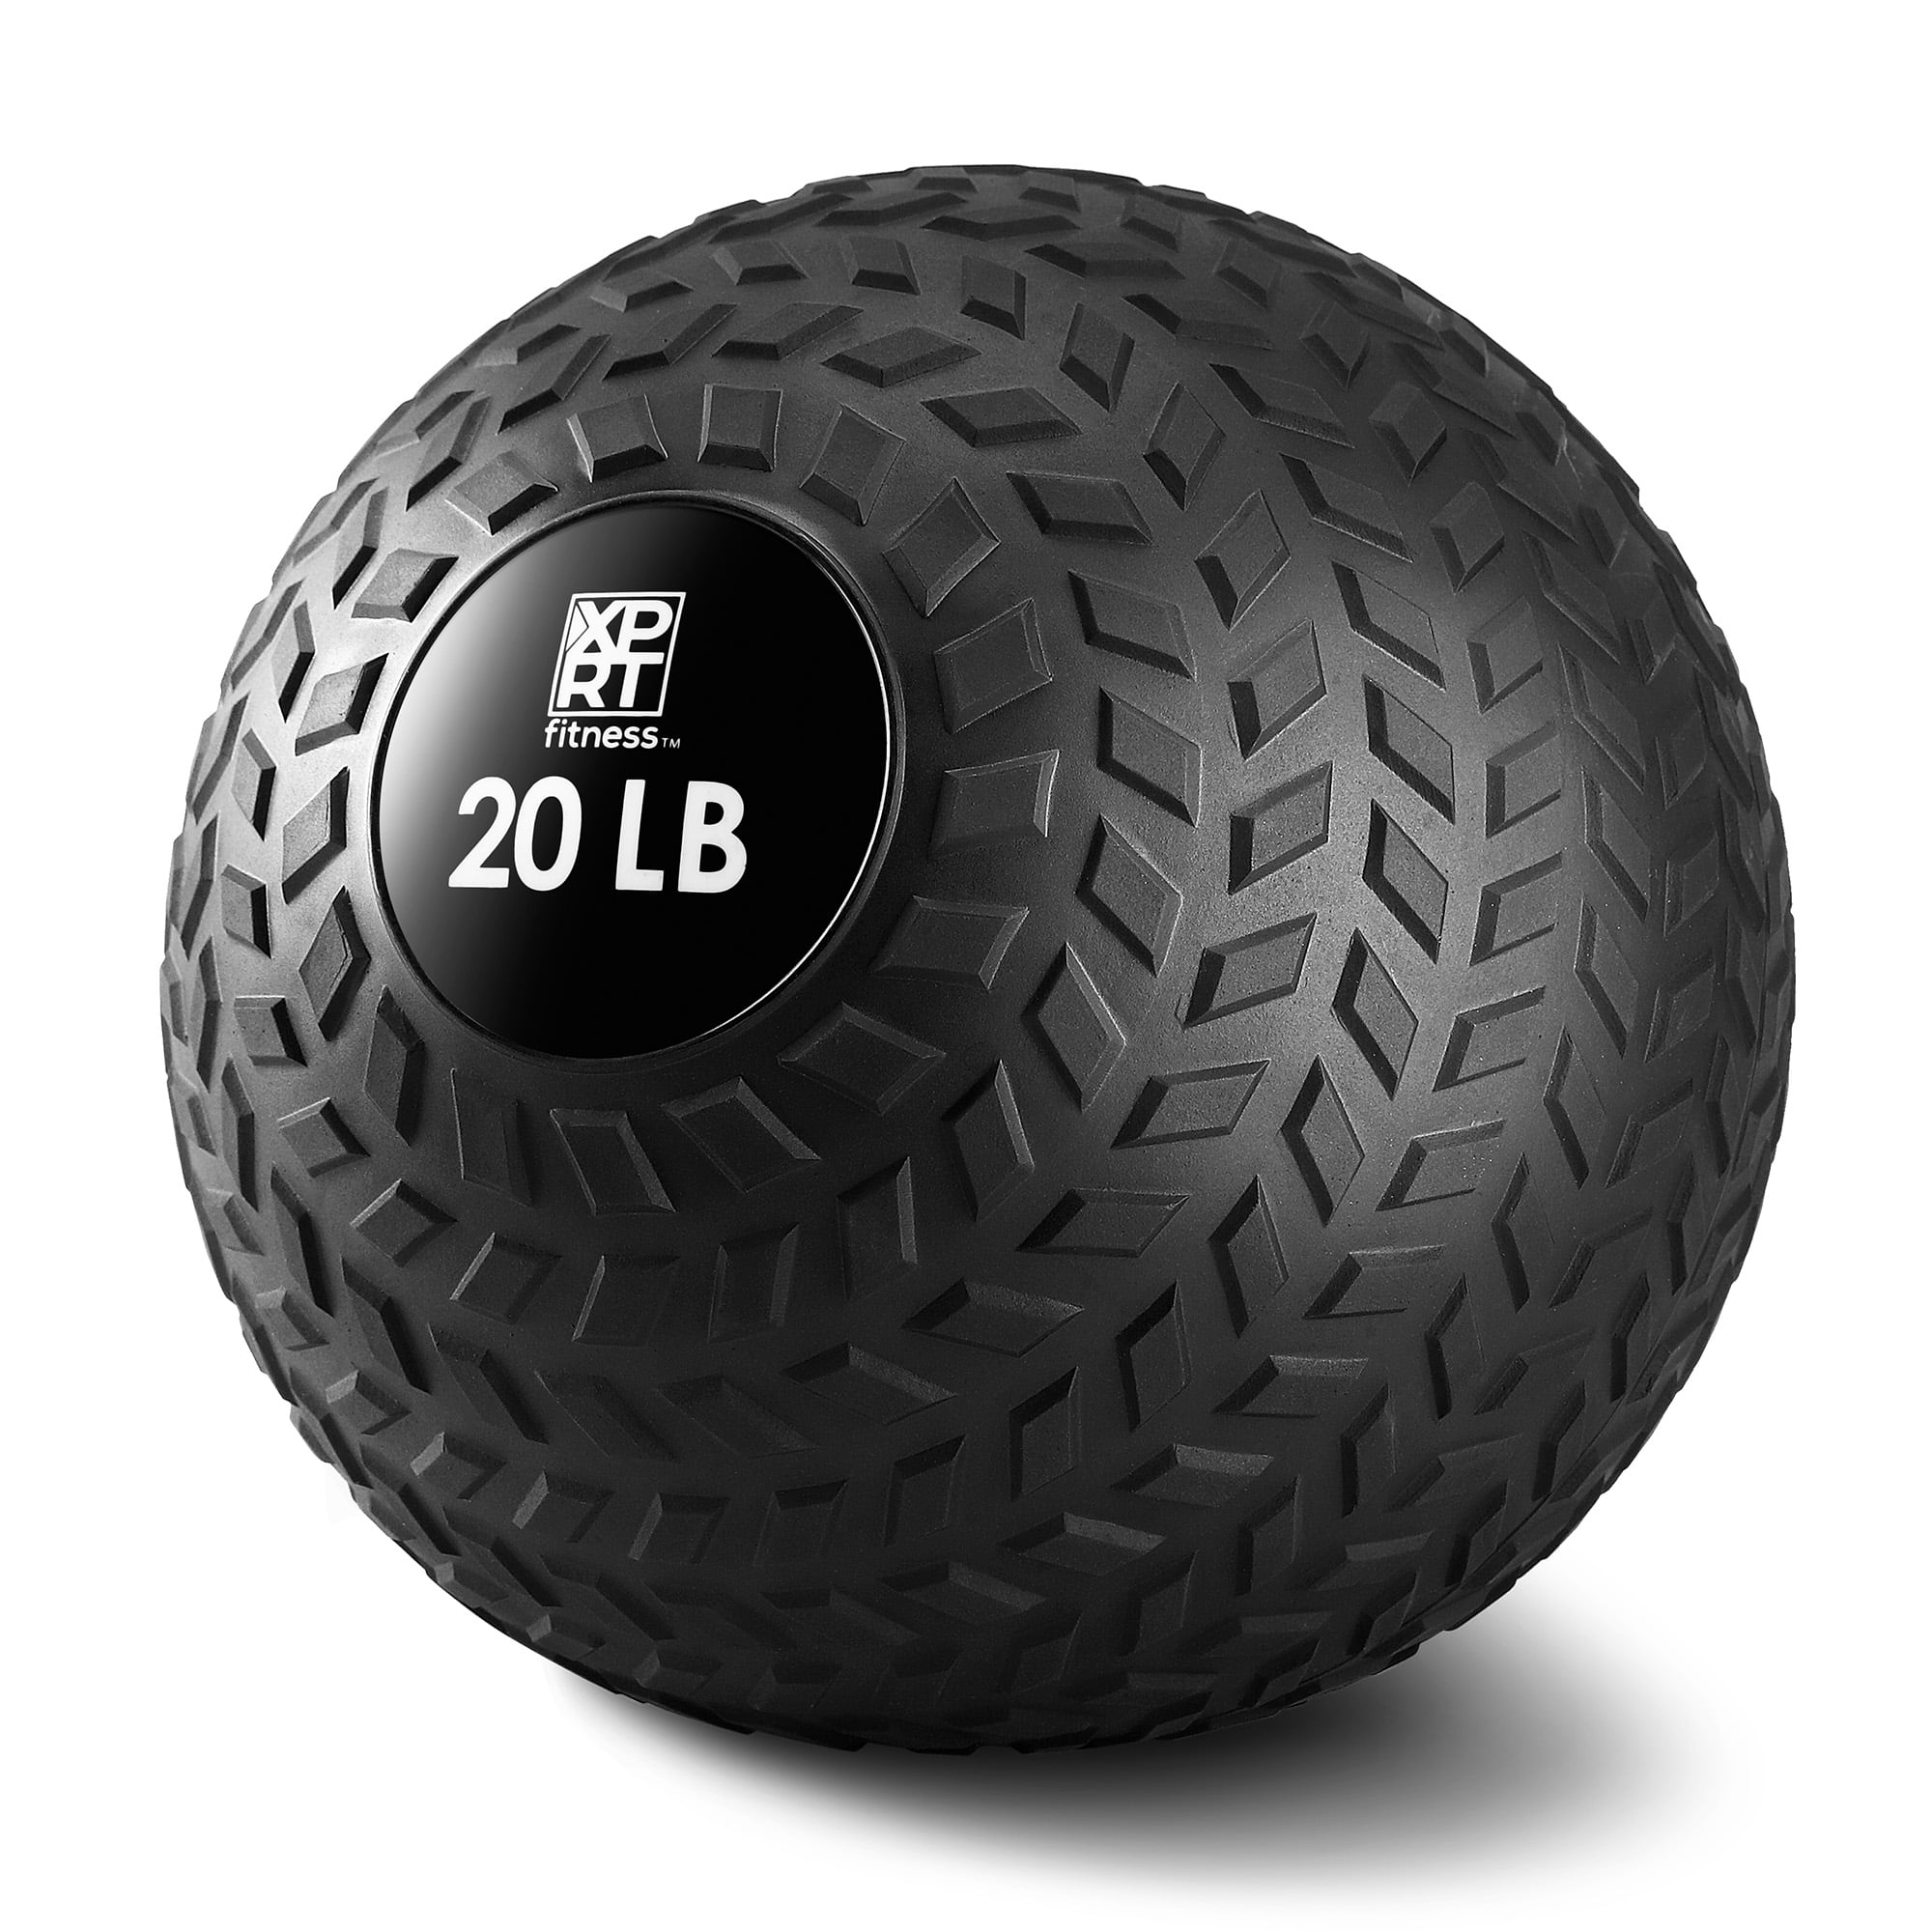 Slam Ball Rubber 15lbs Black Fitness Heavy Duty No Bounce Exercise Fit Weight 